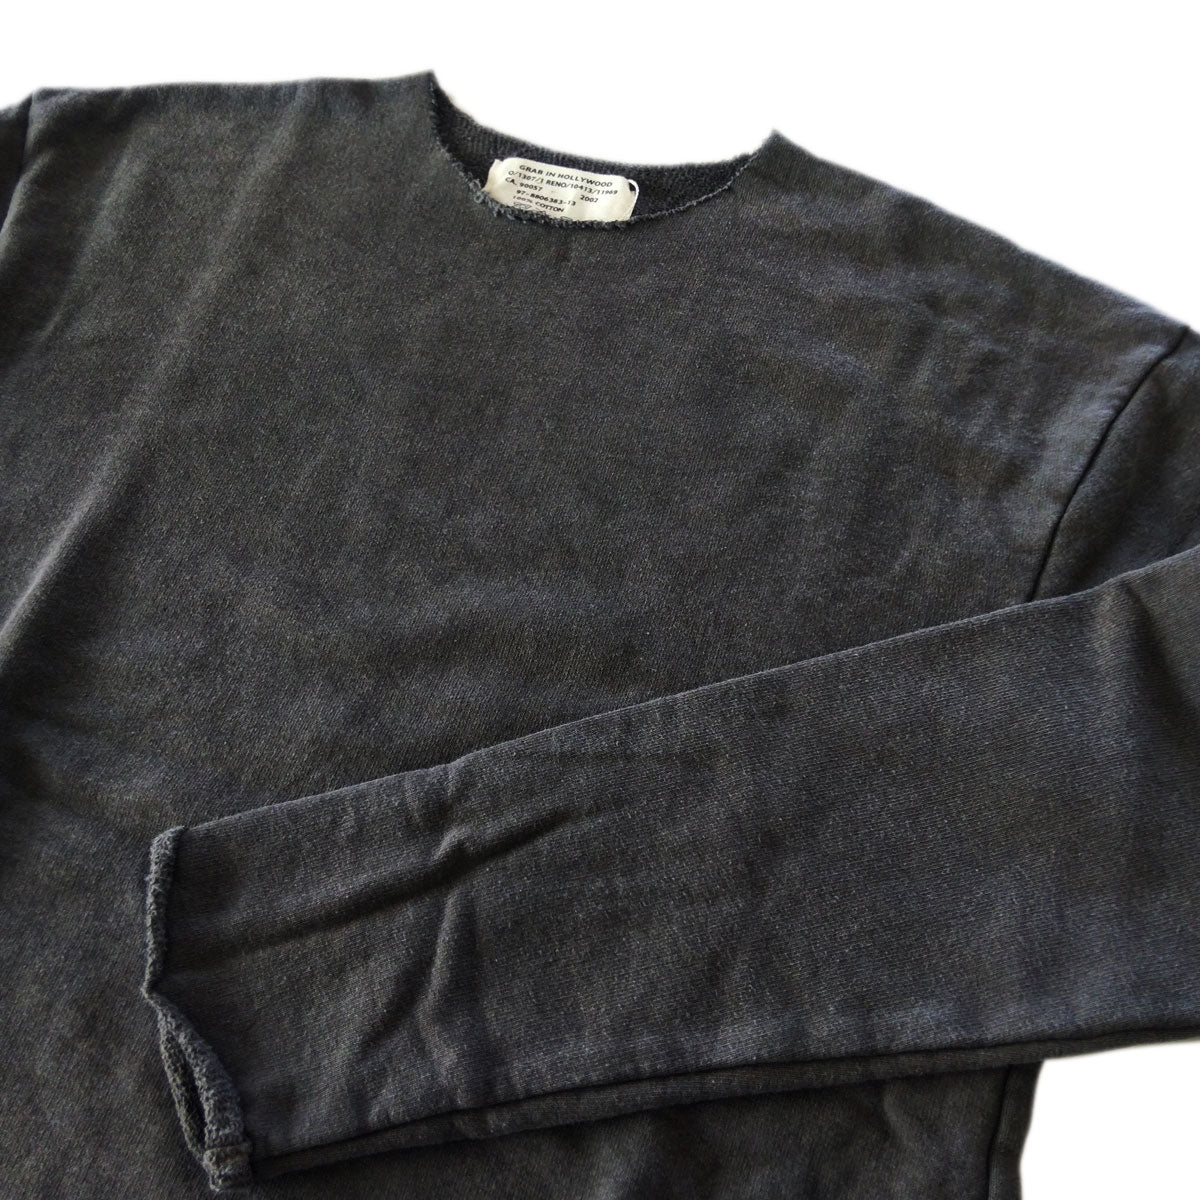 VINTAGE FRENCH TERRY RELAX FIT ALL CUT L/S[ビンテージフレンチテリー リラックスフィット オールカット長袖]PIG BLK